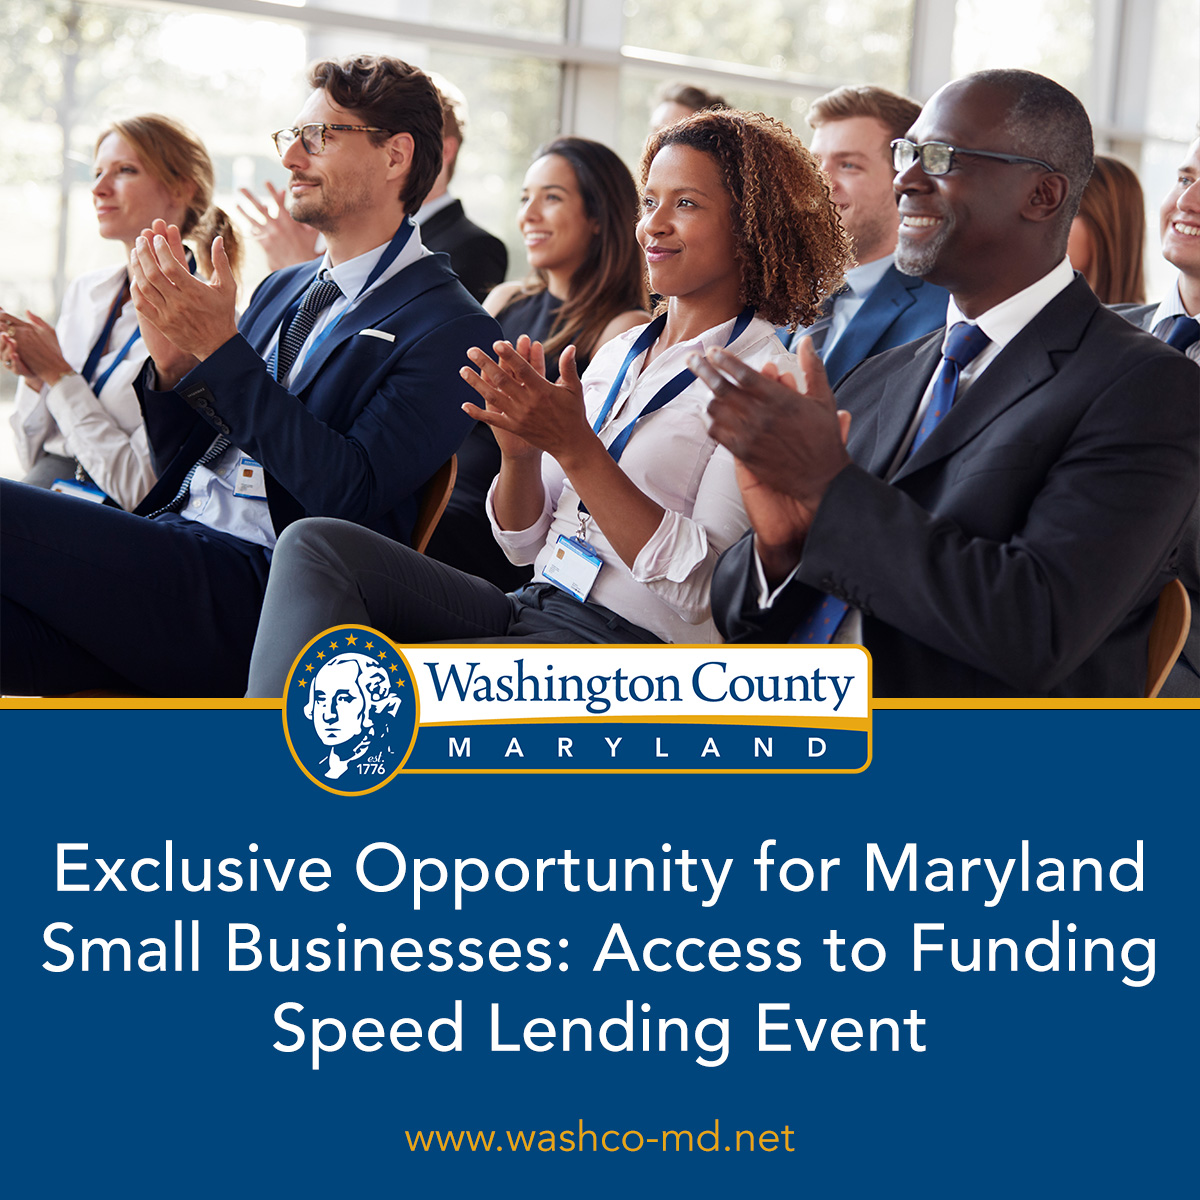 Unique Chance for Small Businesses in Maryland: Fast-track Funding Access Event